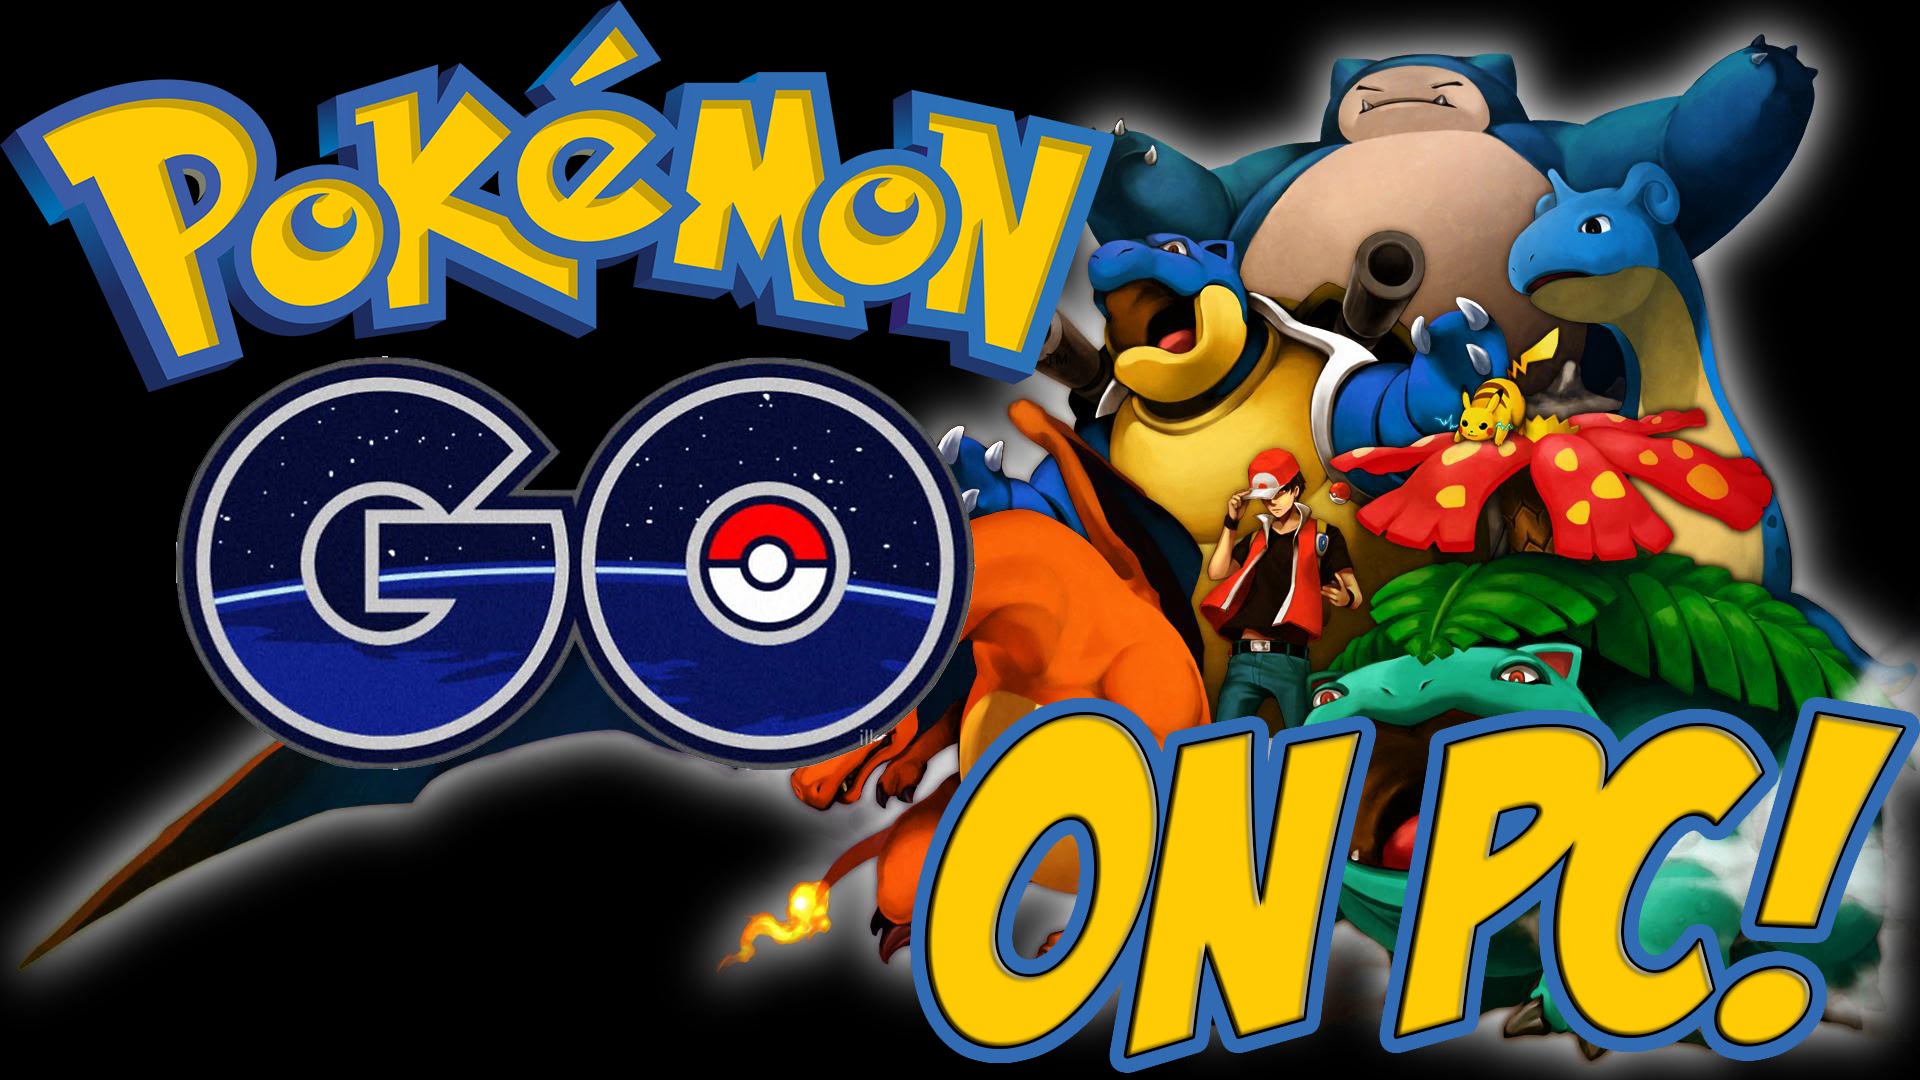 How To Download Pokemon Go On PC